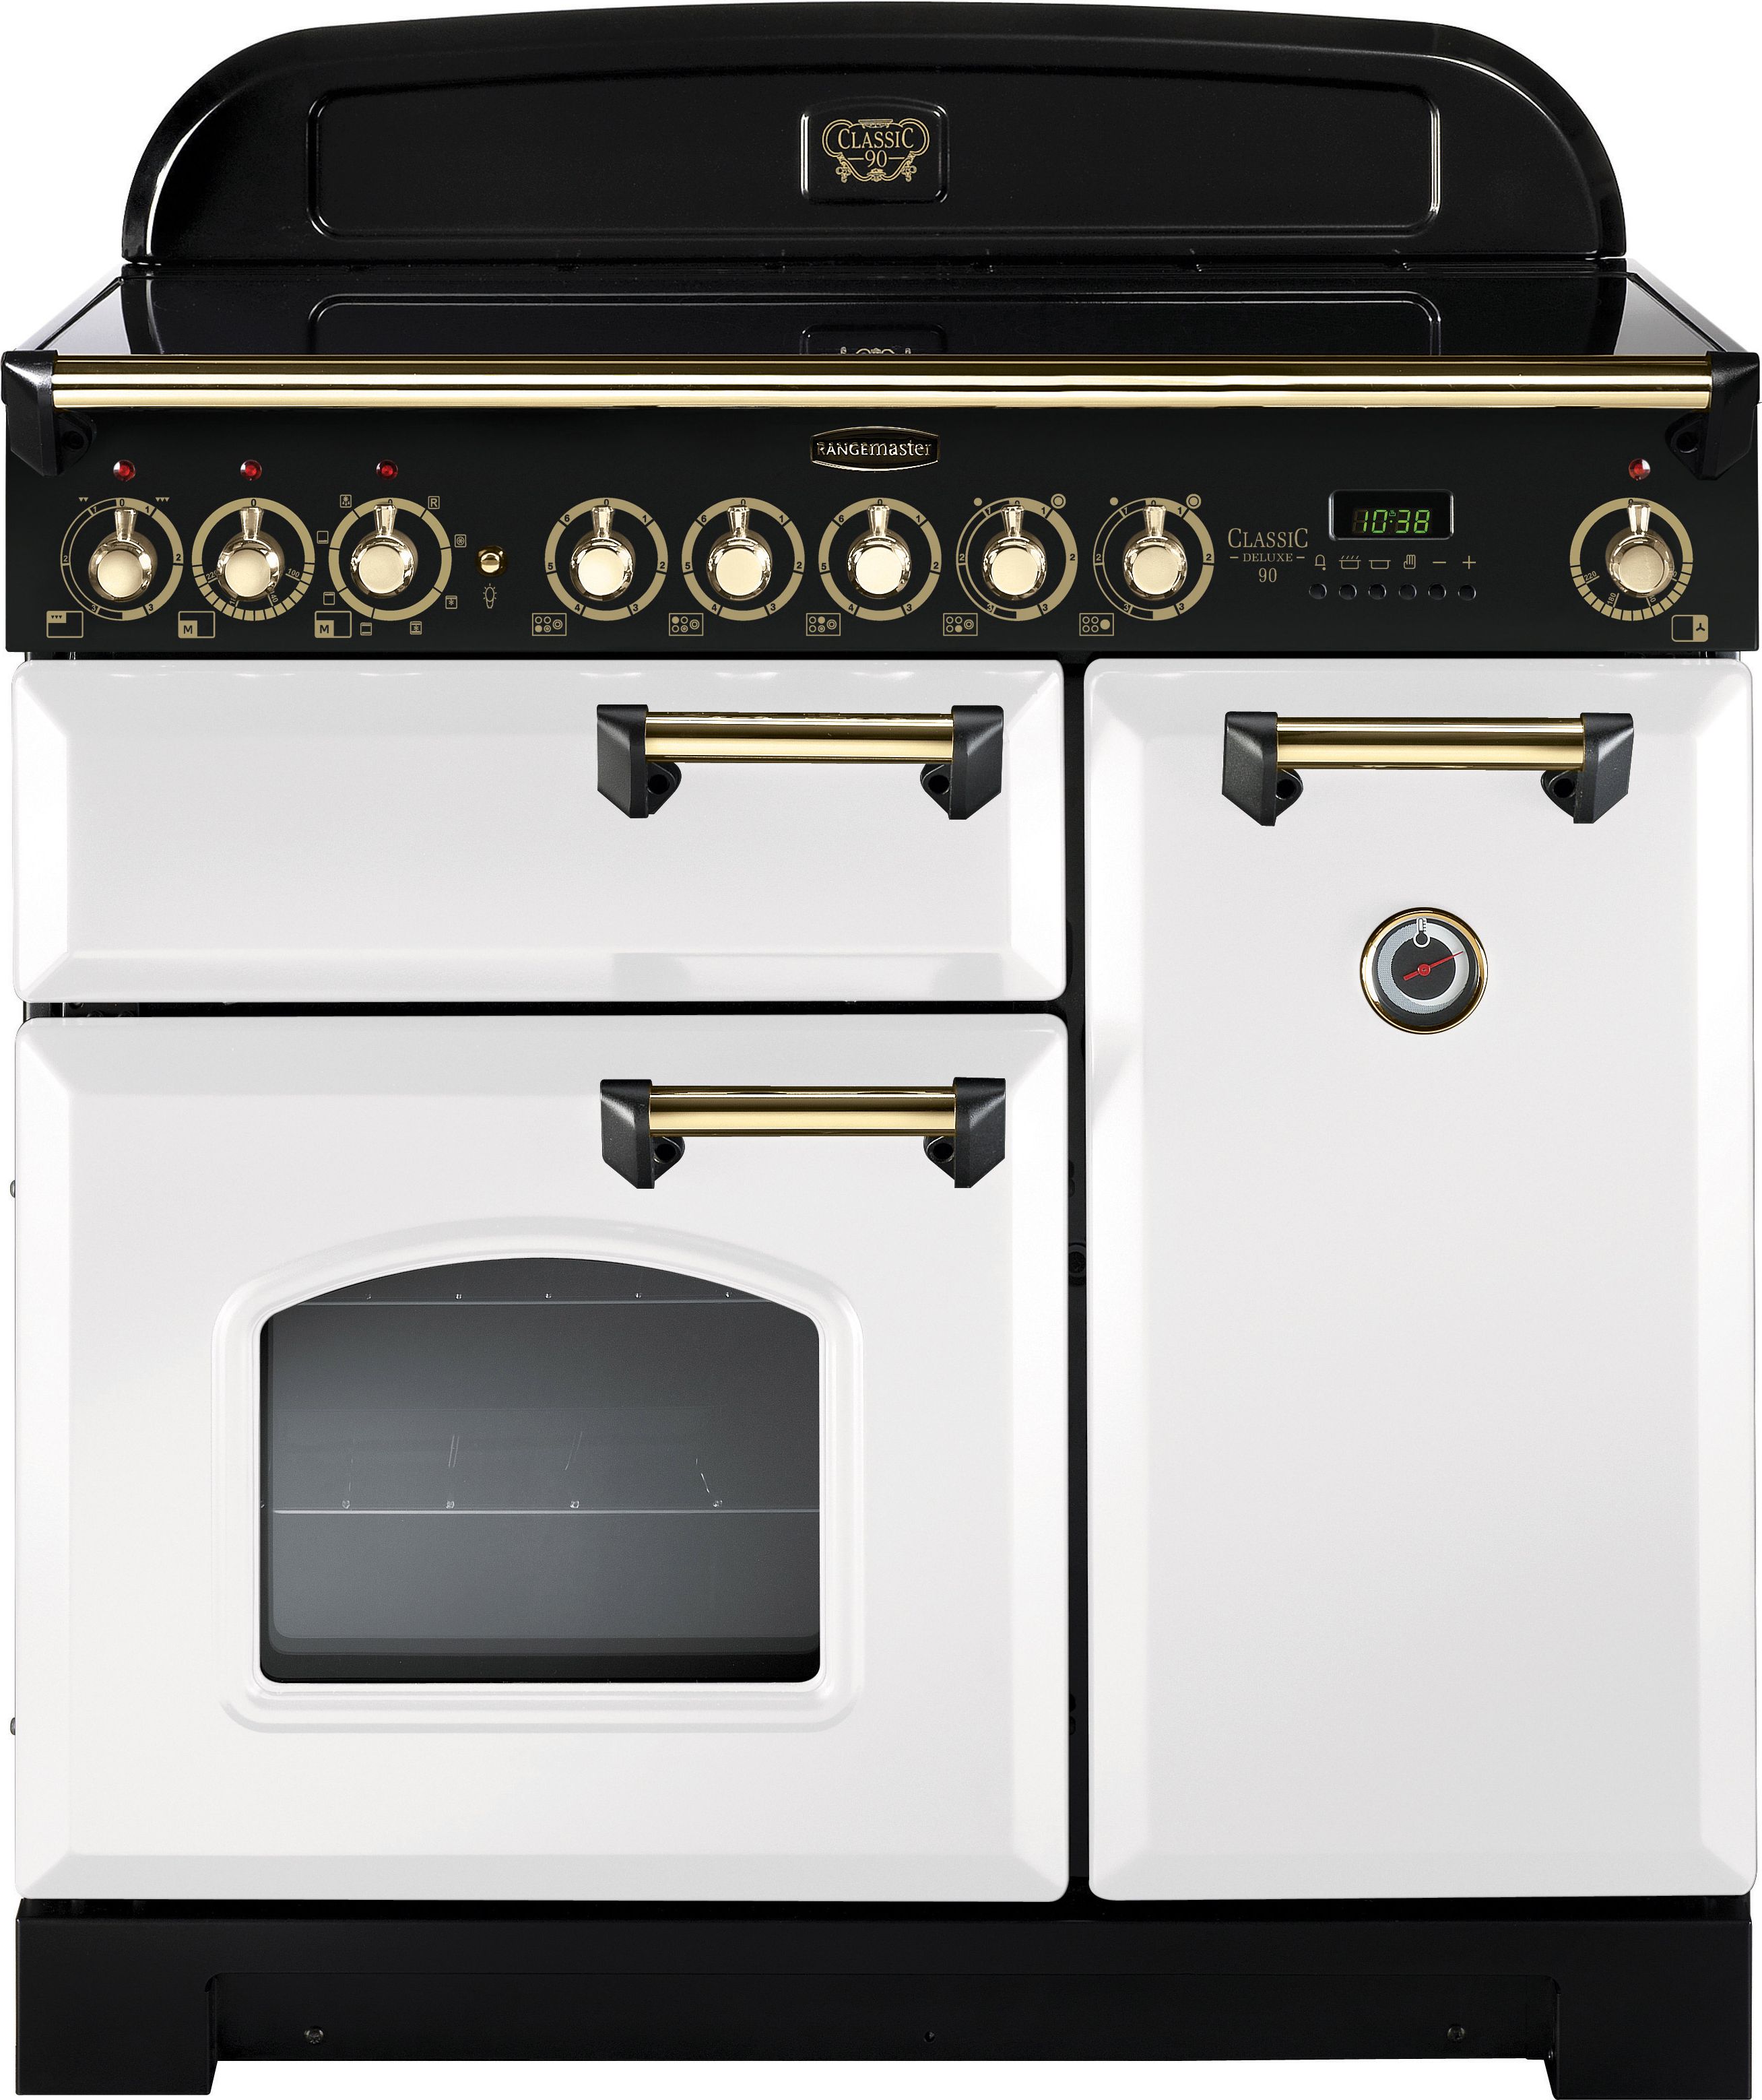 Rangemaster Classic Deluxe CDL90ECWH/B 90cm Electric Range Cooker with Ceramic Hob - White / Brass - A/A Rated, White